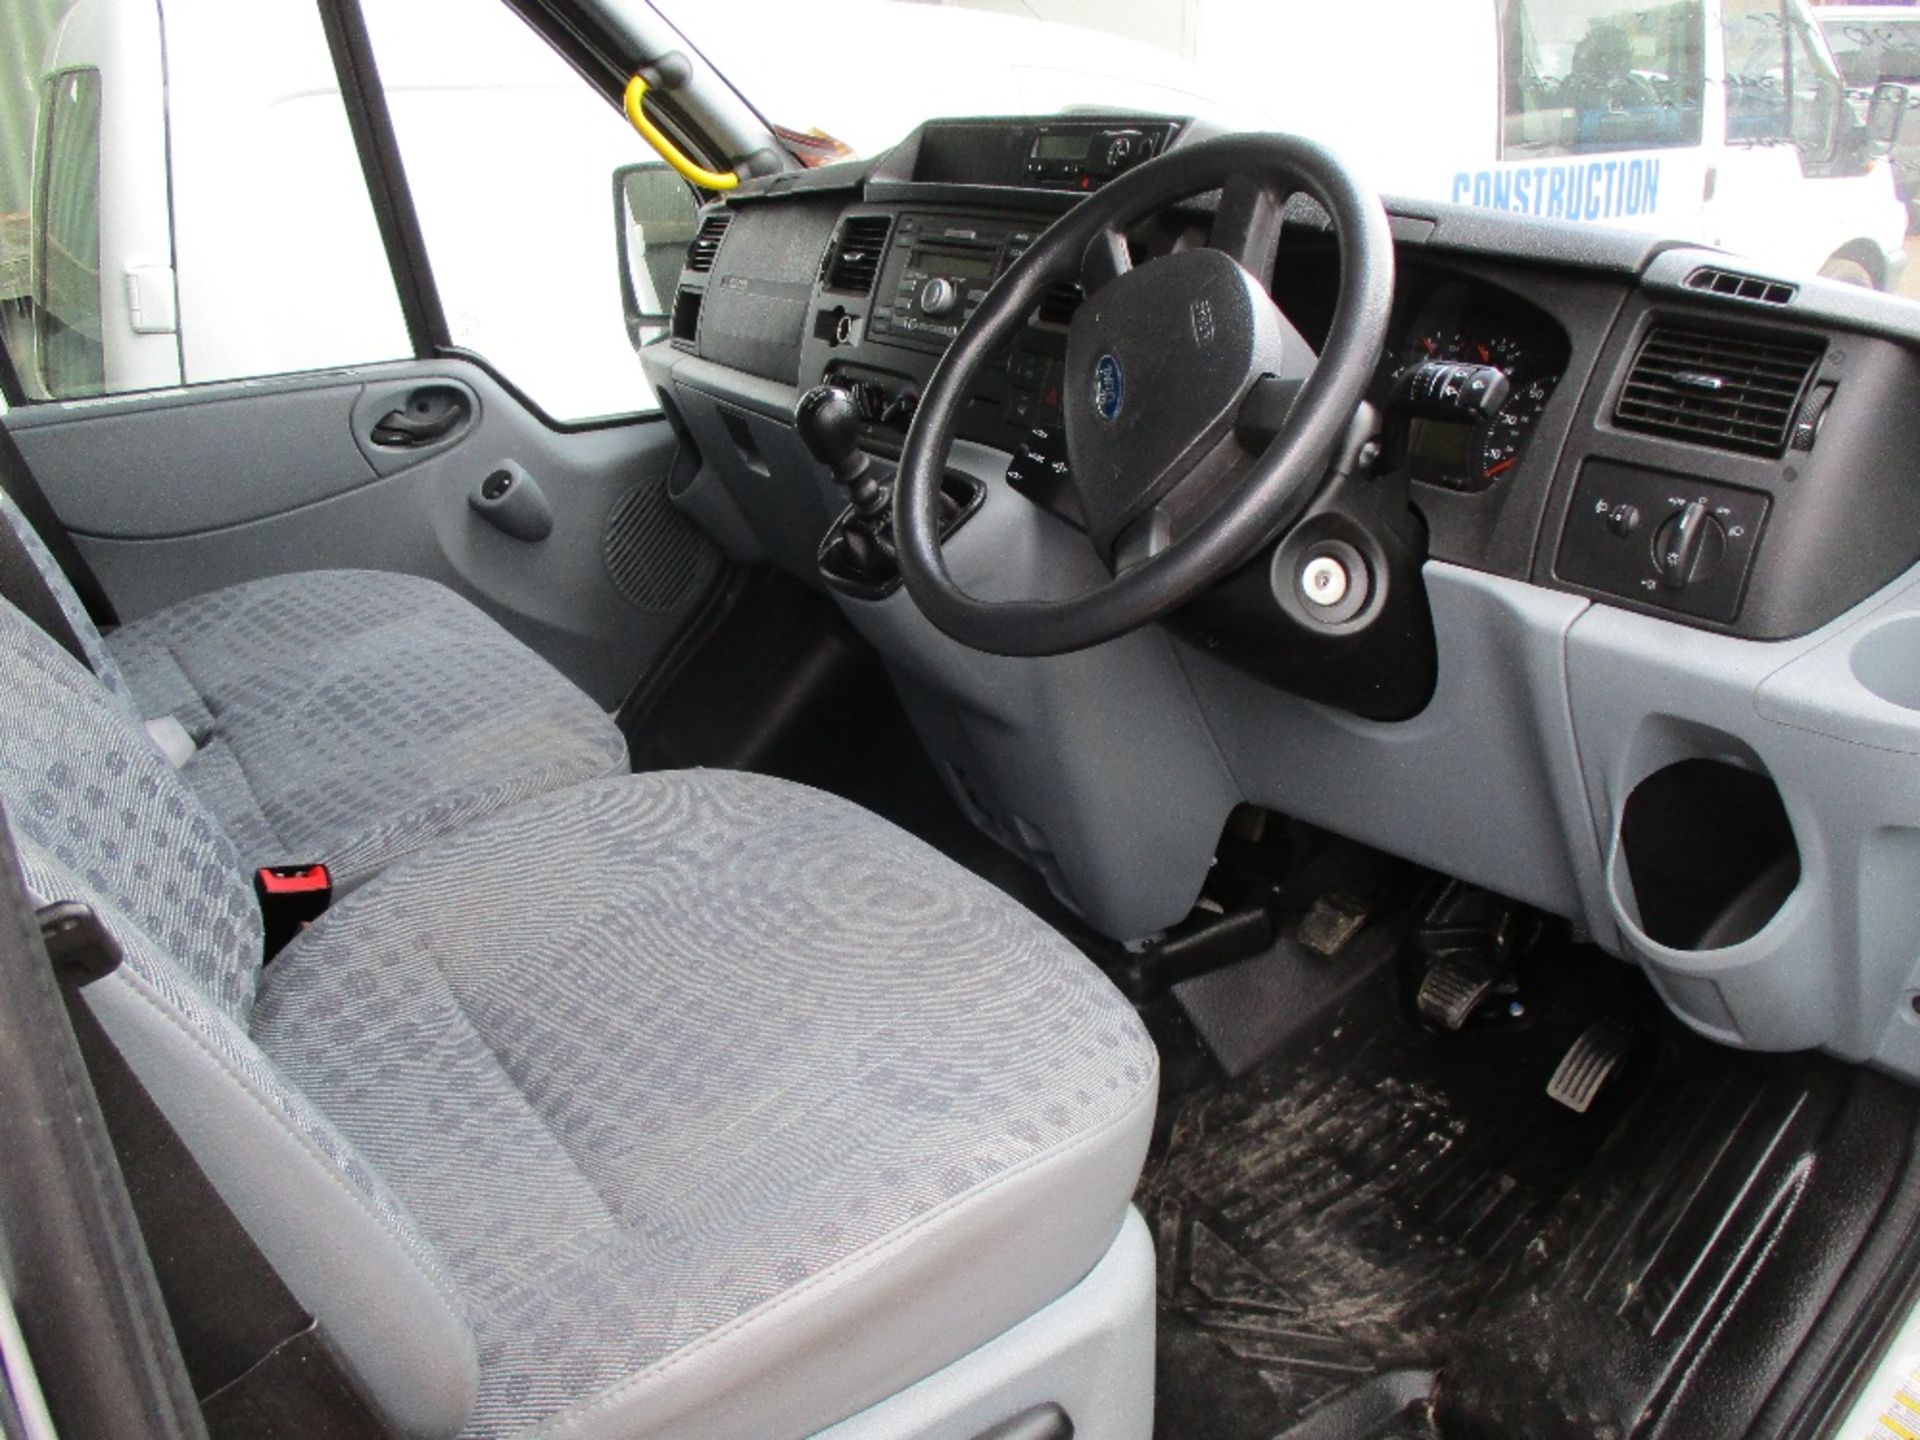 Ford Transit mini bus, 17 seats in total, REG:BD63 OEF previously damaged and repaired, 34,680rec. - Image 2 of 7